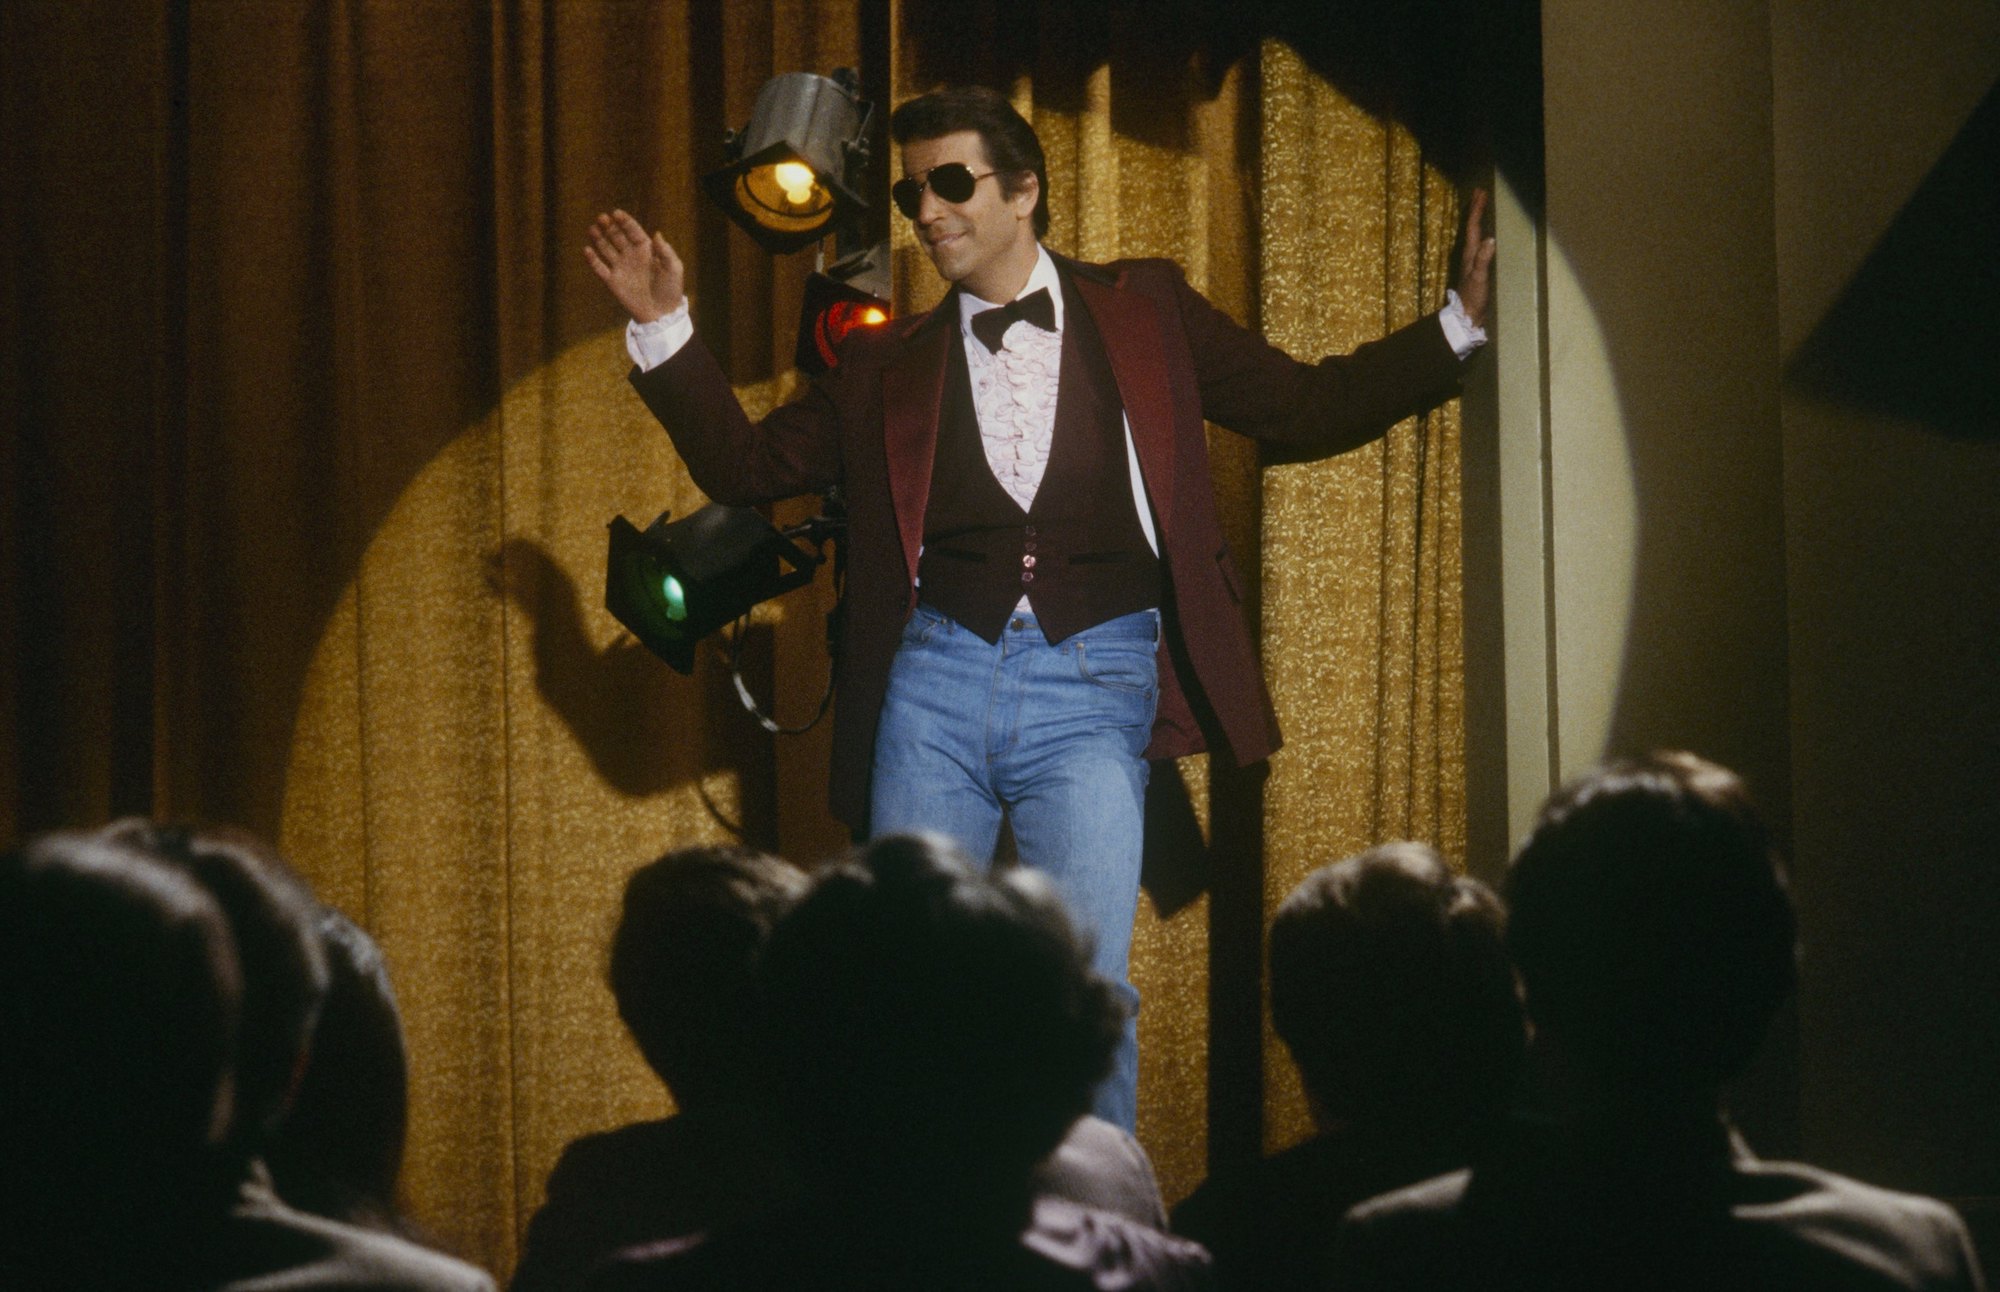 Henry Winkler as Fonzie on Happy Days, standing on a stage wearing sunglasses